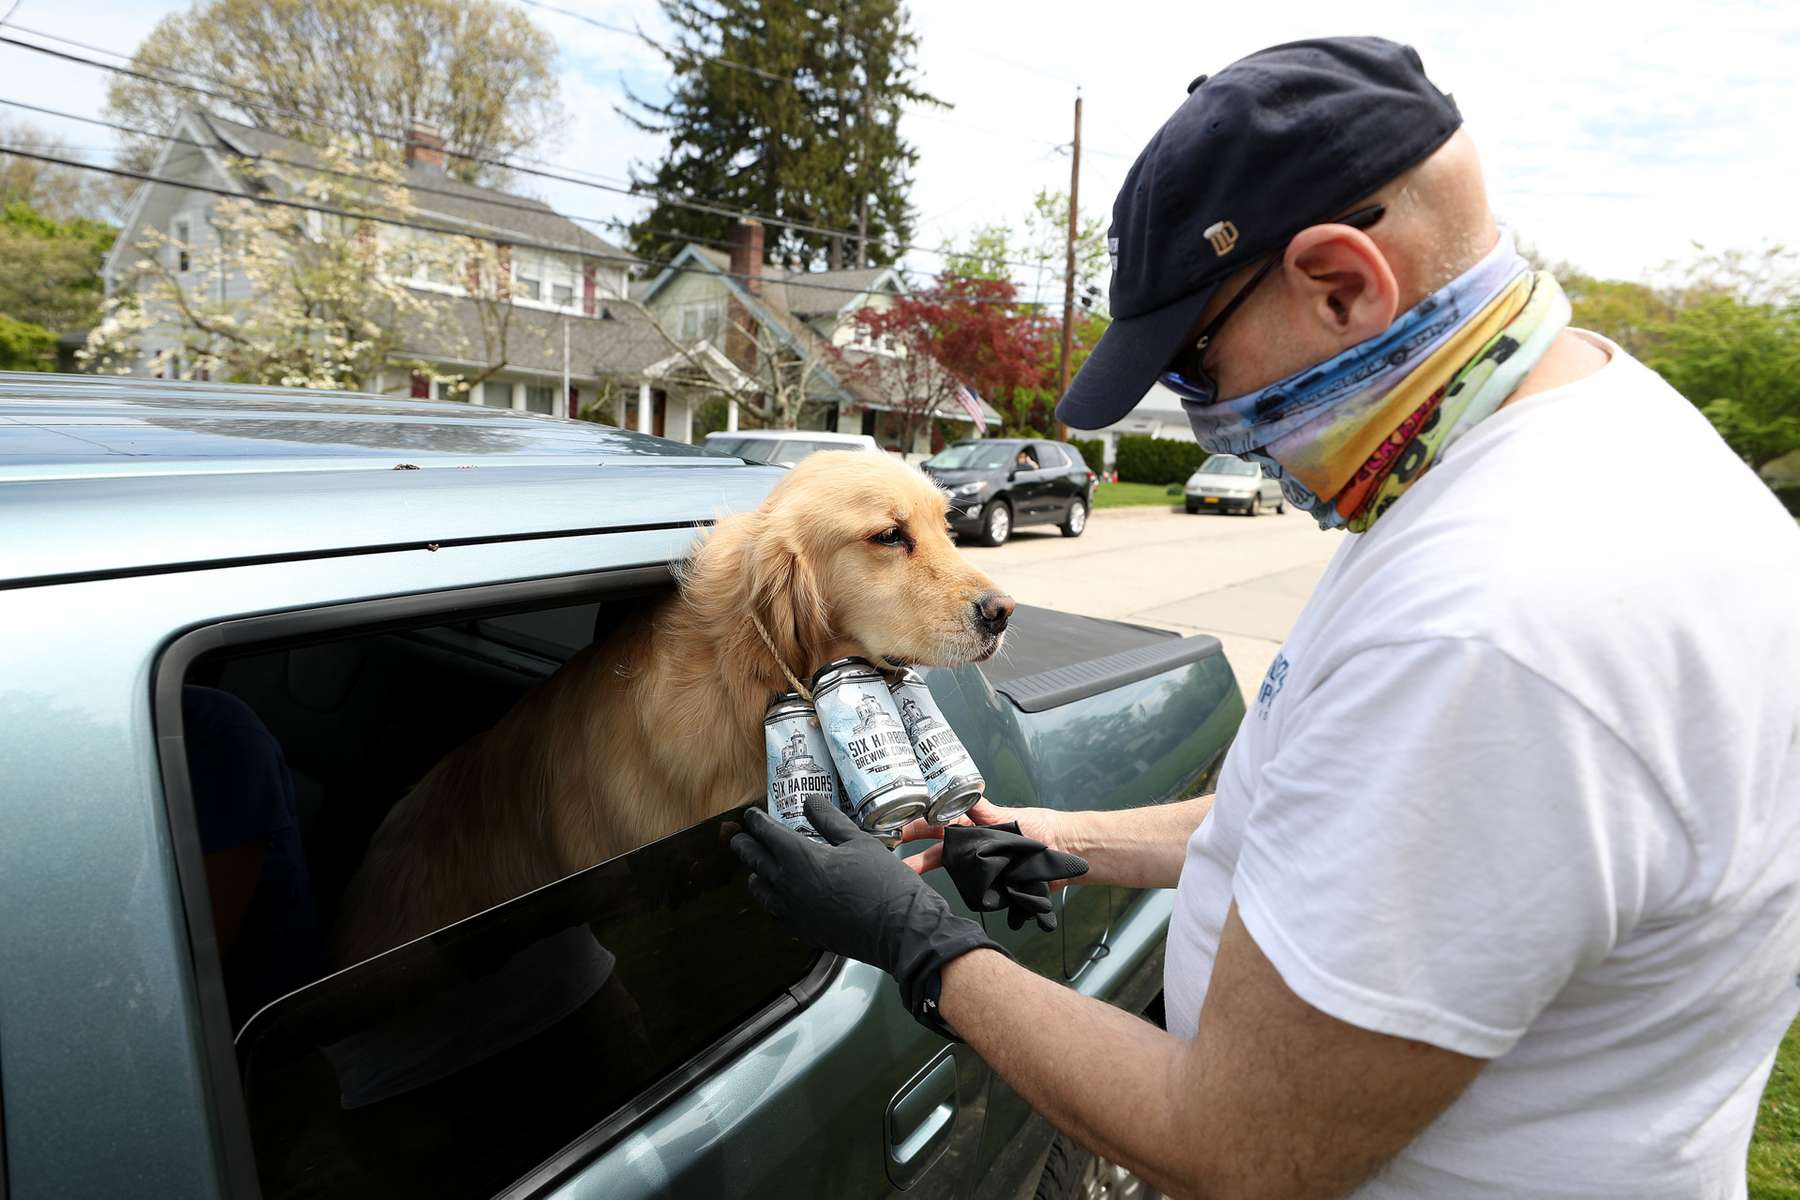 Mark and Karen Heuwetter fit their two dogs Buddy and Barley with an empty four pack of beer cans before a delivery to their customers on May 03, 2020 in Huntington Village, New York.  Mark and Karen Heuwetter own the Six Harbors Brewery and have trained their two Golden Retrievers Buddy and Barley to help them deliver beer to their customers during the coronavirus COVID-19 pandemic.  The dogs are fitted with a four pack of empty beer cans around their necks and meet customers at their doorstep while Mark and Karen carry the beer to deliver behind them.  It has been comforting for the dogs who are enjoying the exercise and meeting people along the way.  The customers love seeing Buddy and Barley and enjoy petting and greeting them to go with their beer delivery. 